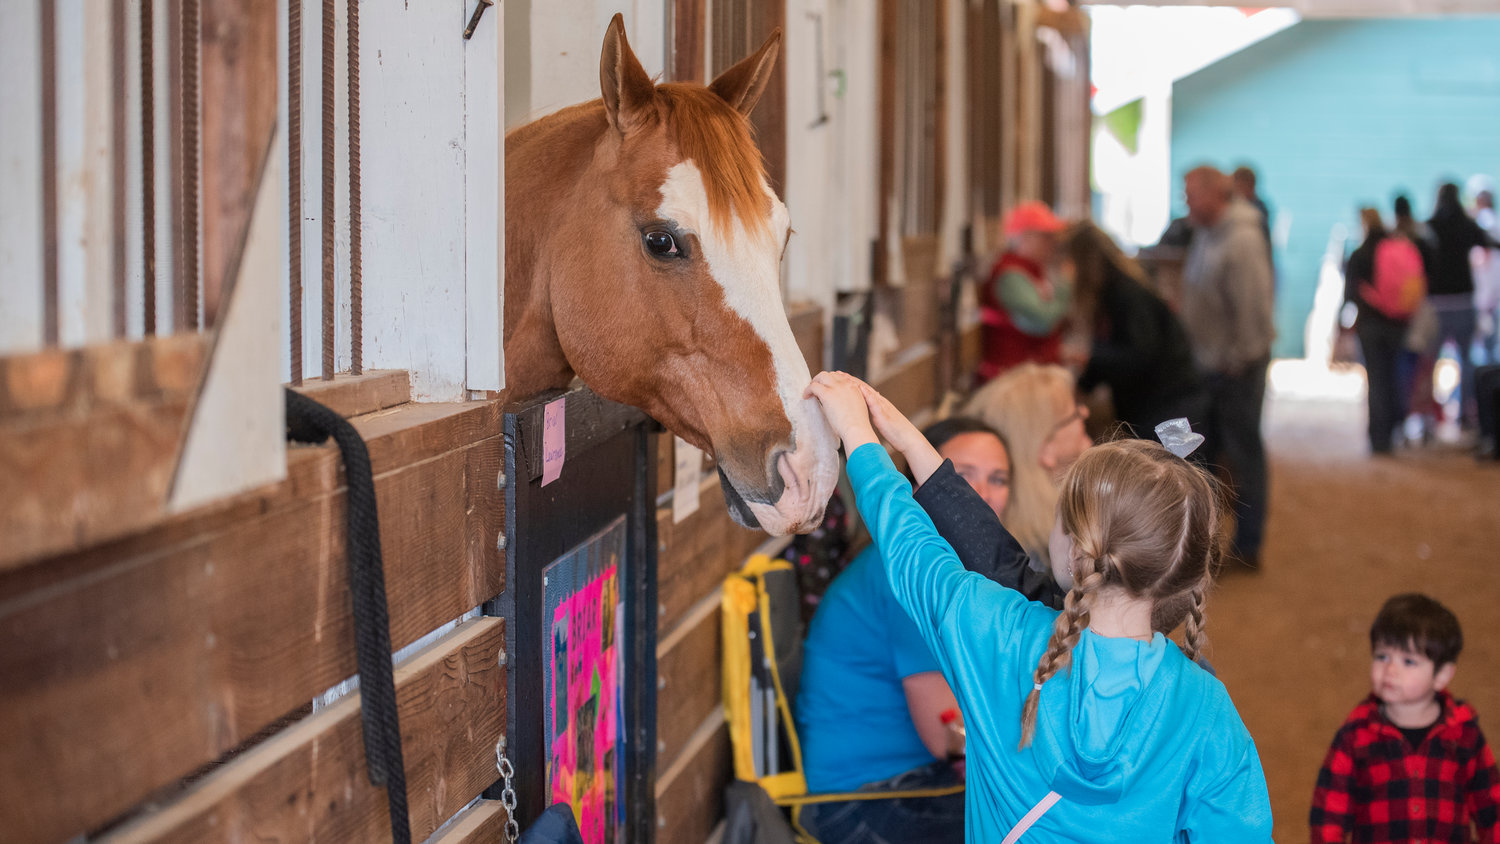 Nibbles, a horse, receives pets on Sunday during the Spring Youth Fair in Centralia.